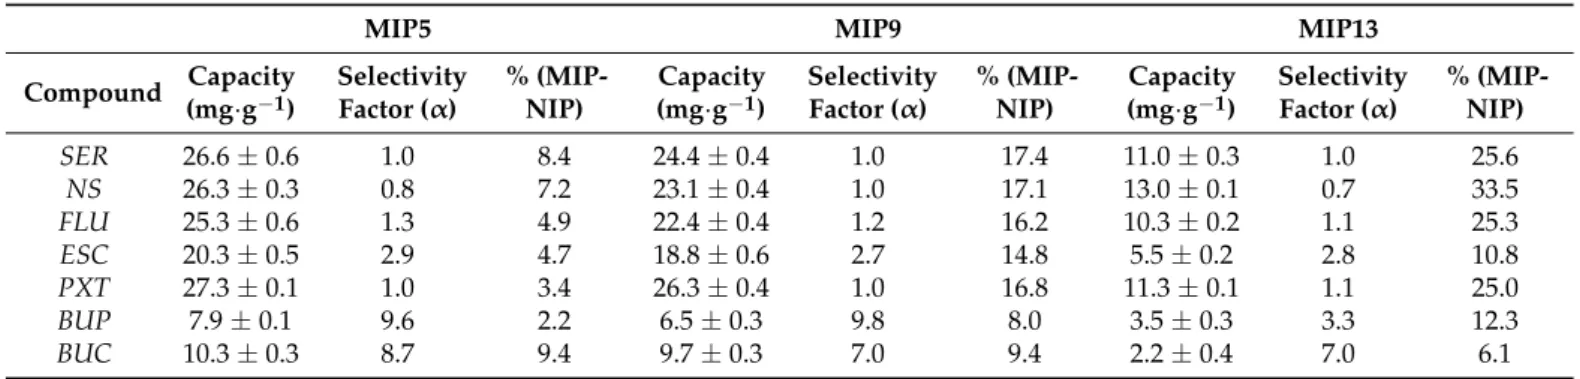 Table 2. The capacity and selectivity factor of MIP5, MIP9, and MIP13 and the difference in binding of each compound between MIP and the corresponding NIP at 1 mM concentration of each tested analyte.